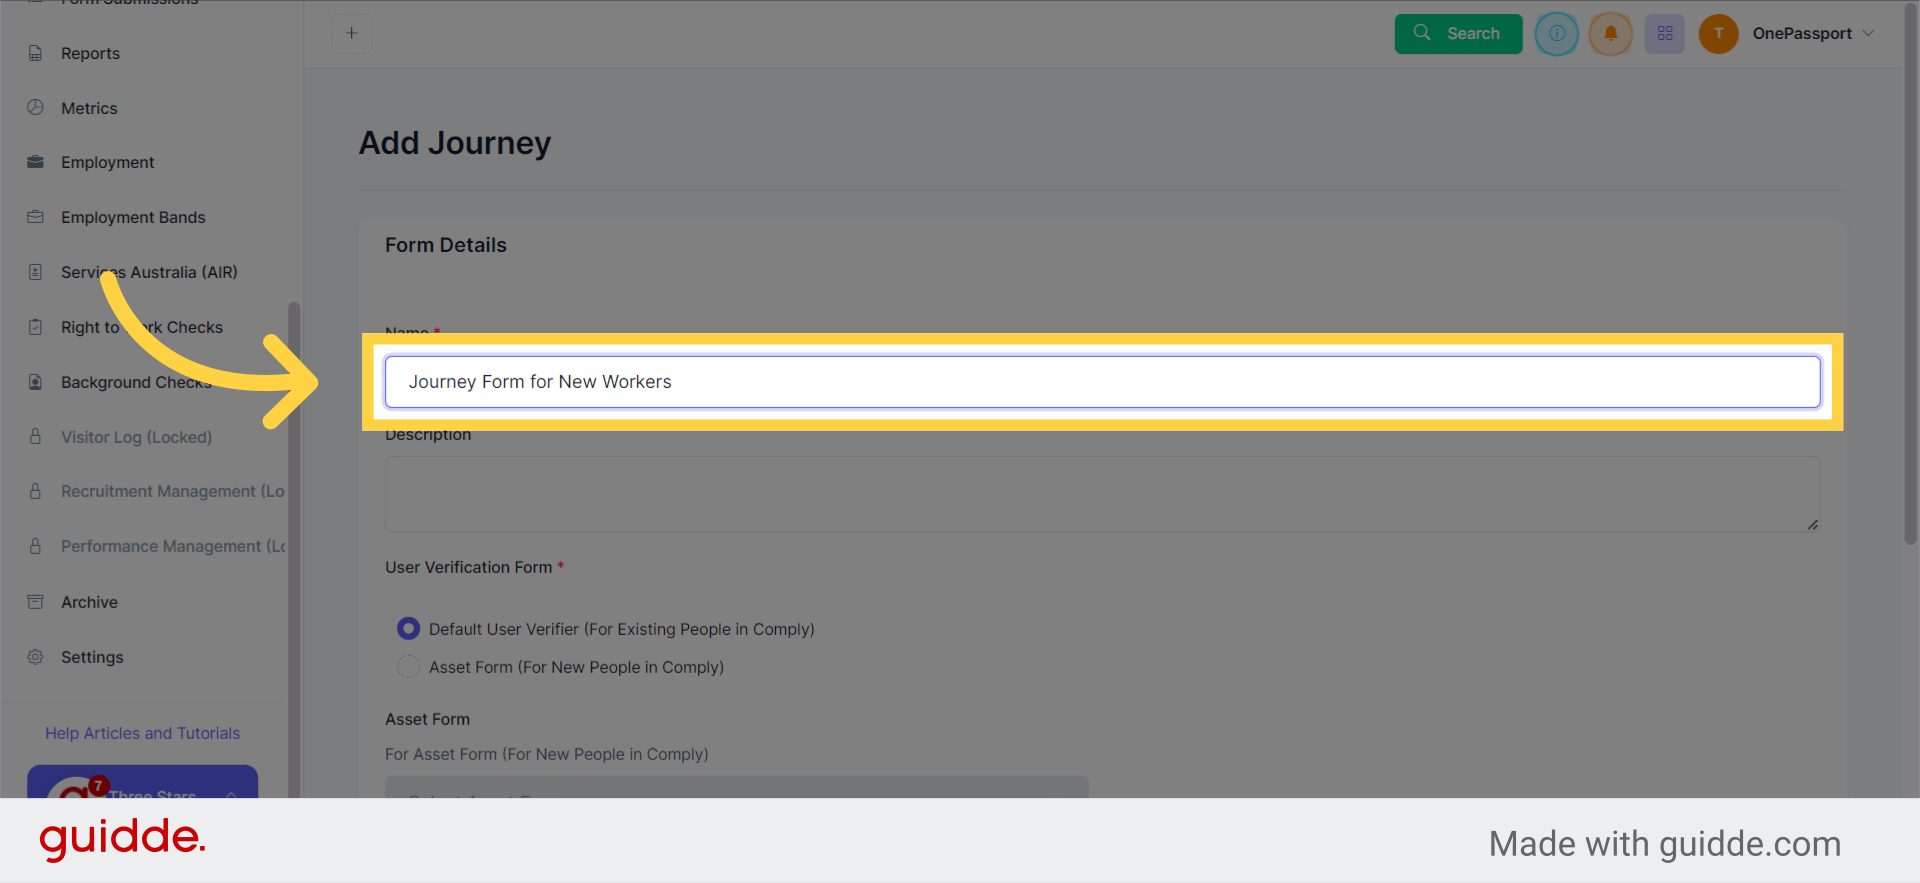 Provide a Name for the Journey Form. For instance, fill 'Journey Form for New Workers'